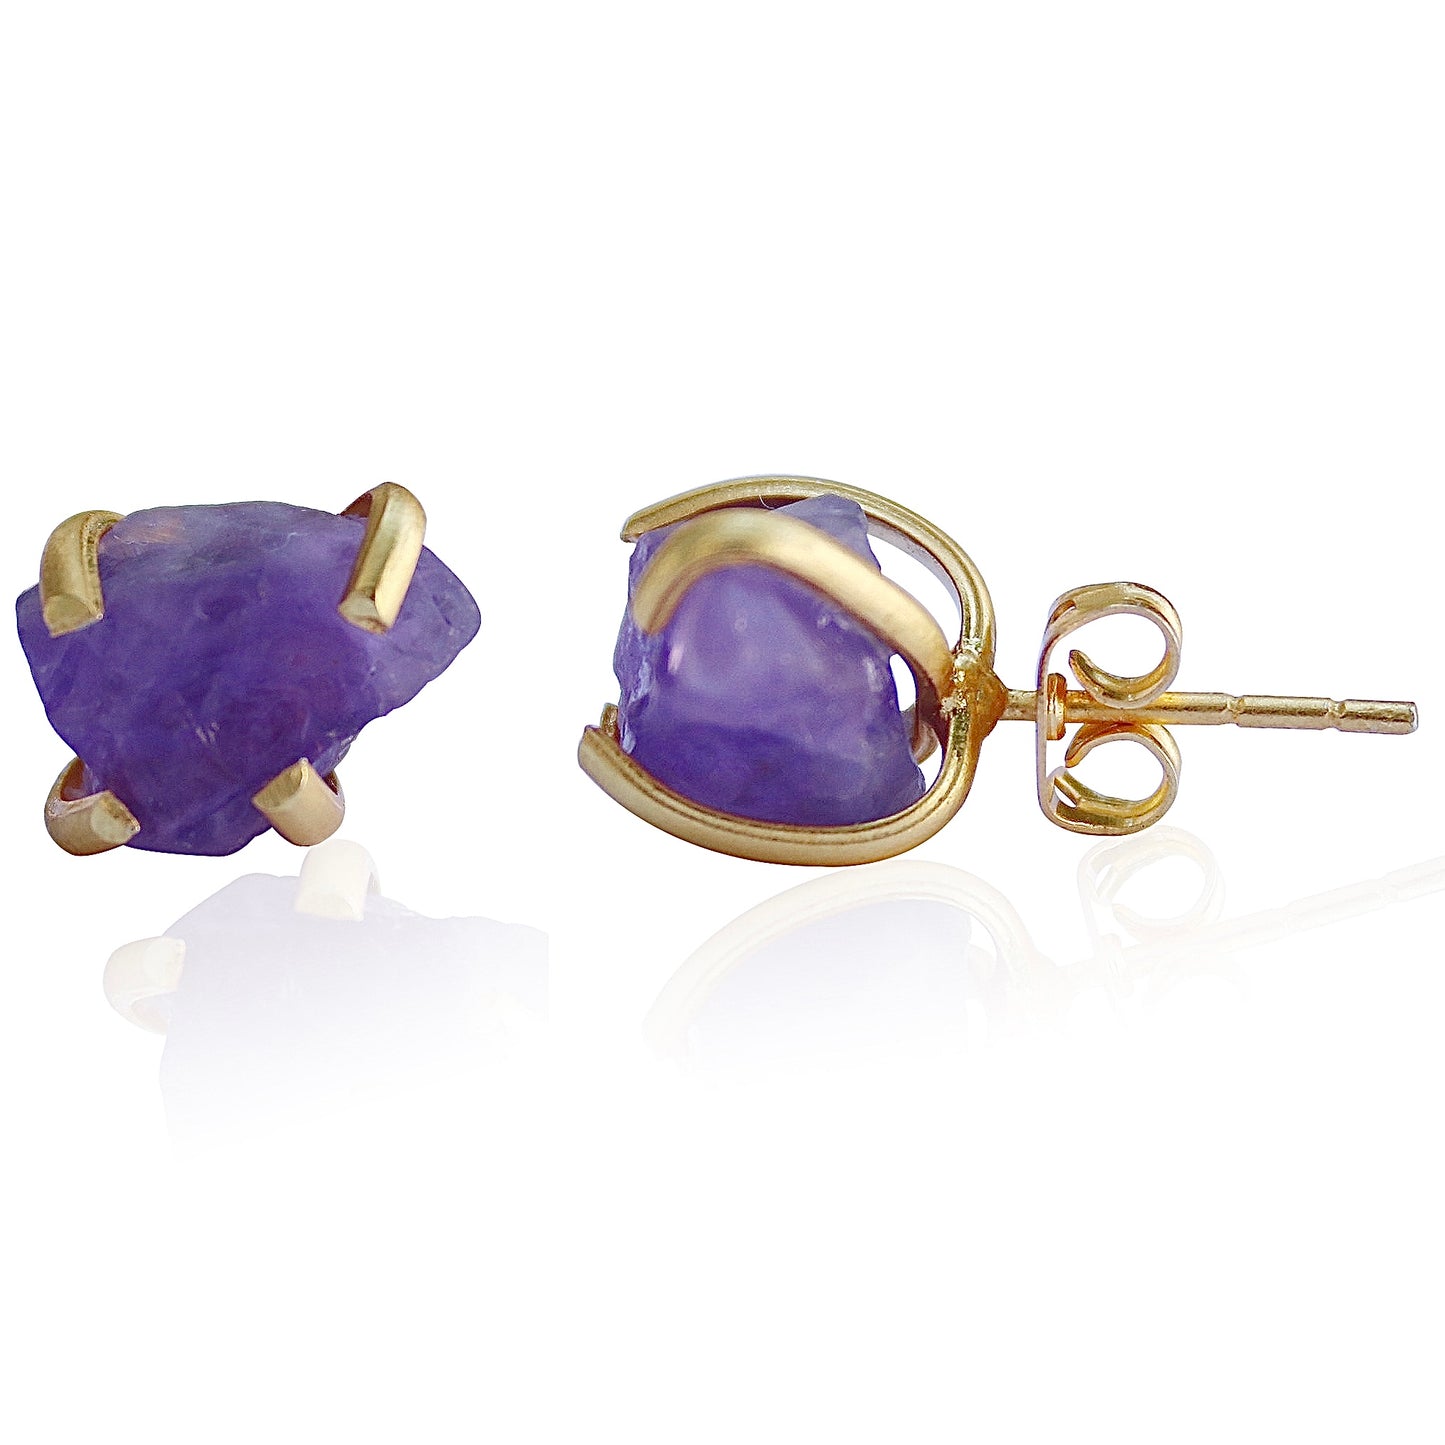 RAW NATURAL STONE STUD EARRINGS - AMETHYST - The Glam Harbor